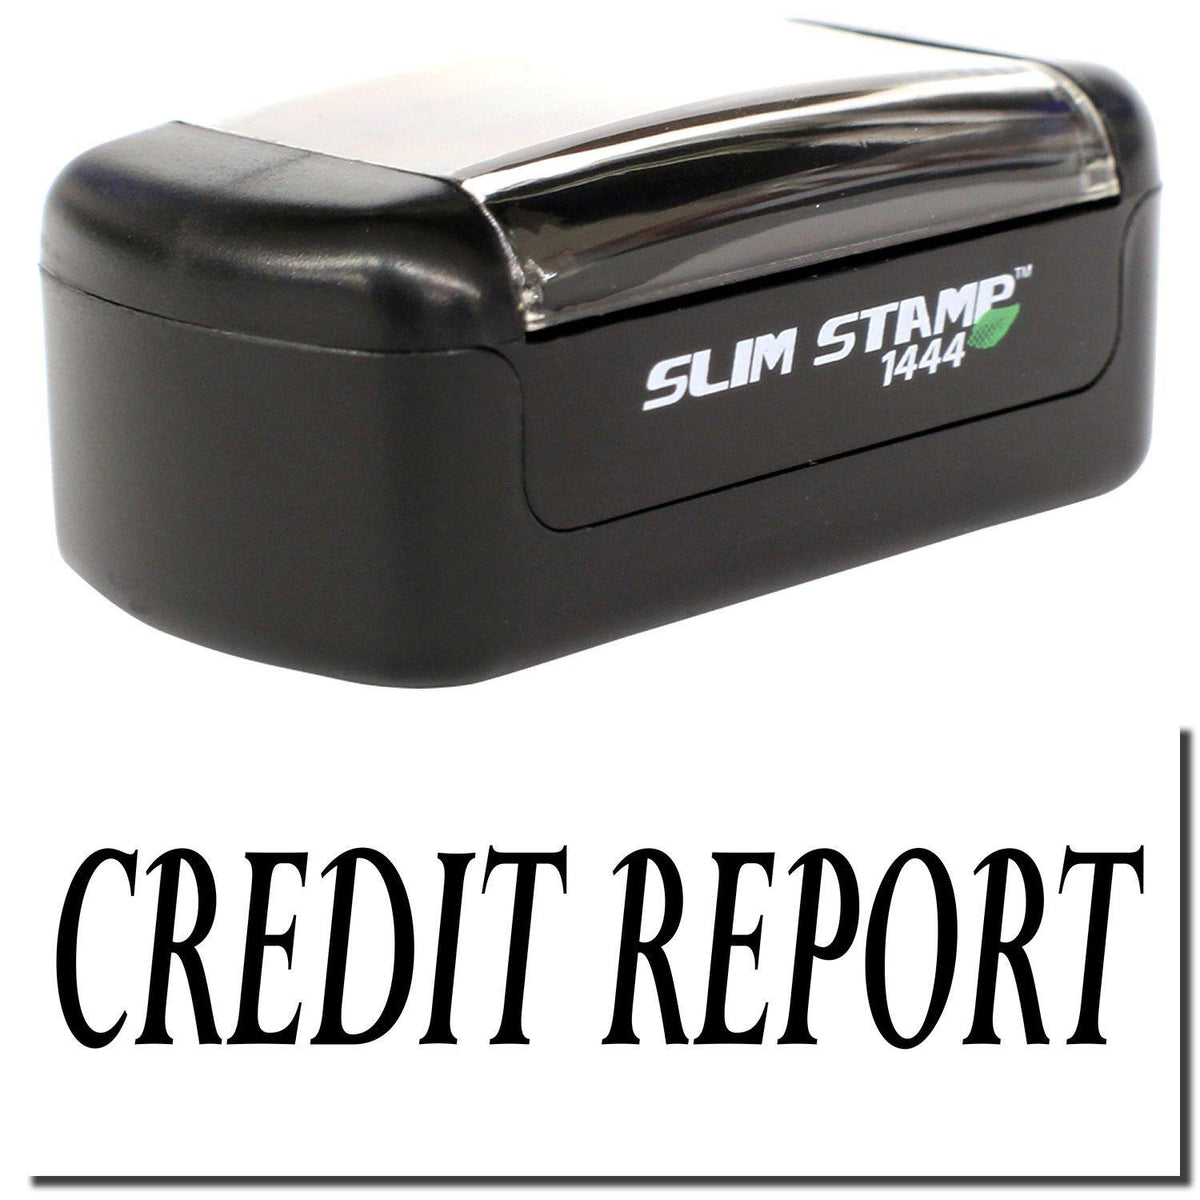 A stock office pre-inked stamp with a stamped image showing how the text &quot;CREDIT REPORT&quot; is displayed after stamping.